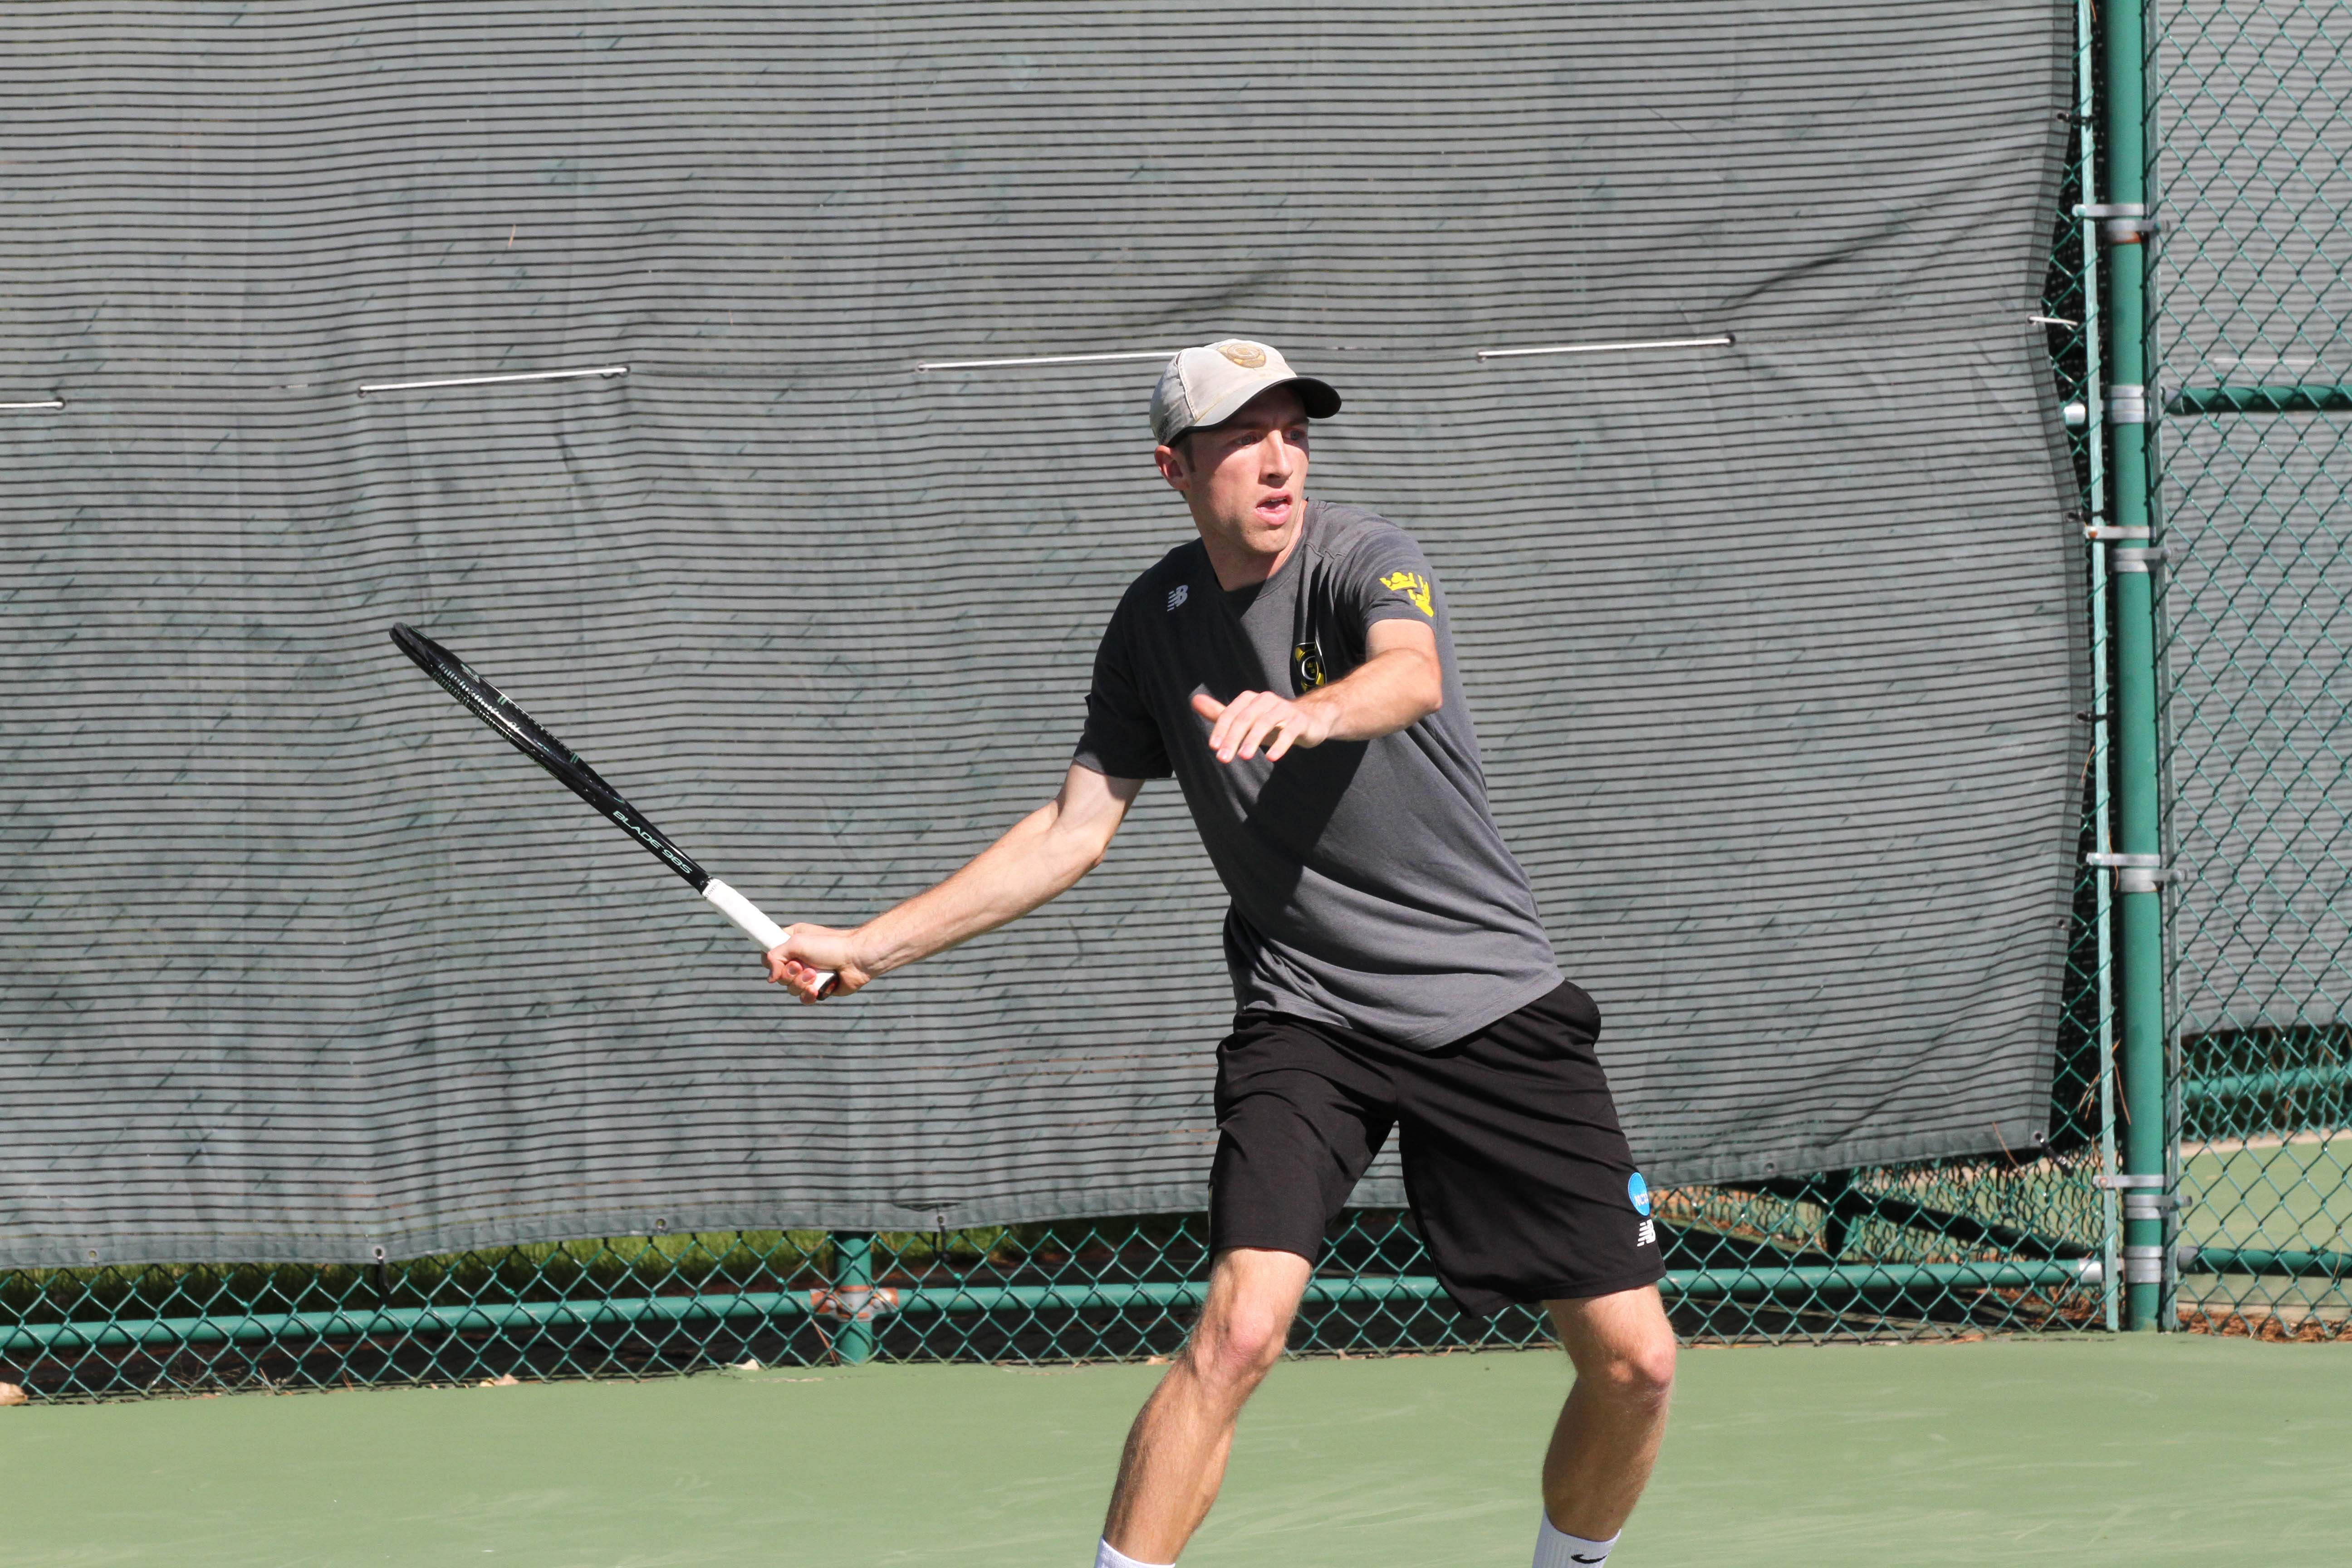 Senior Chase Johnson returns a ball during a match earlier this season. After sweeping conference opponents, St. Olaf and Hamline, the Gusties have improved their record to 8-2.